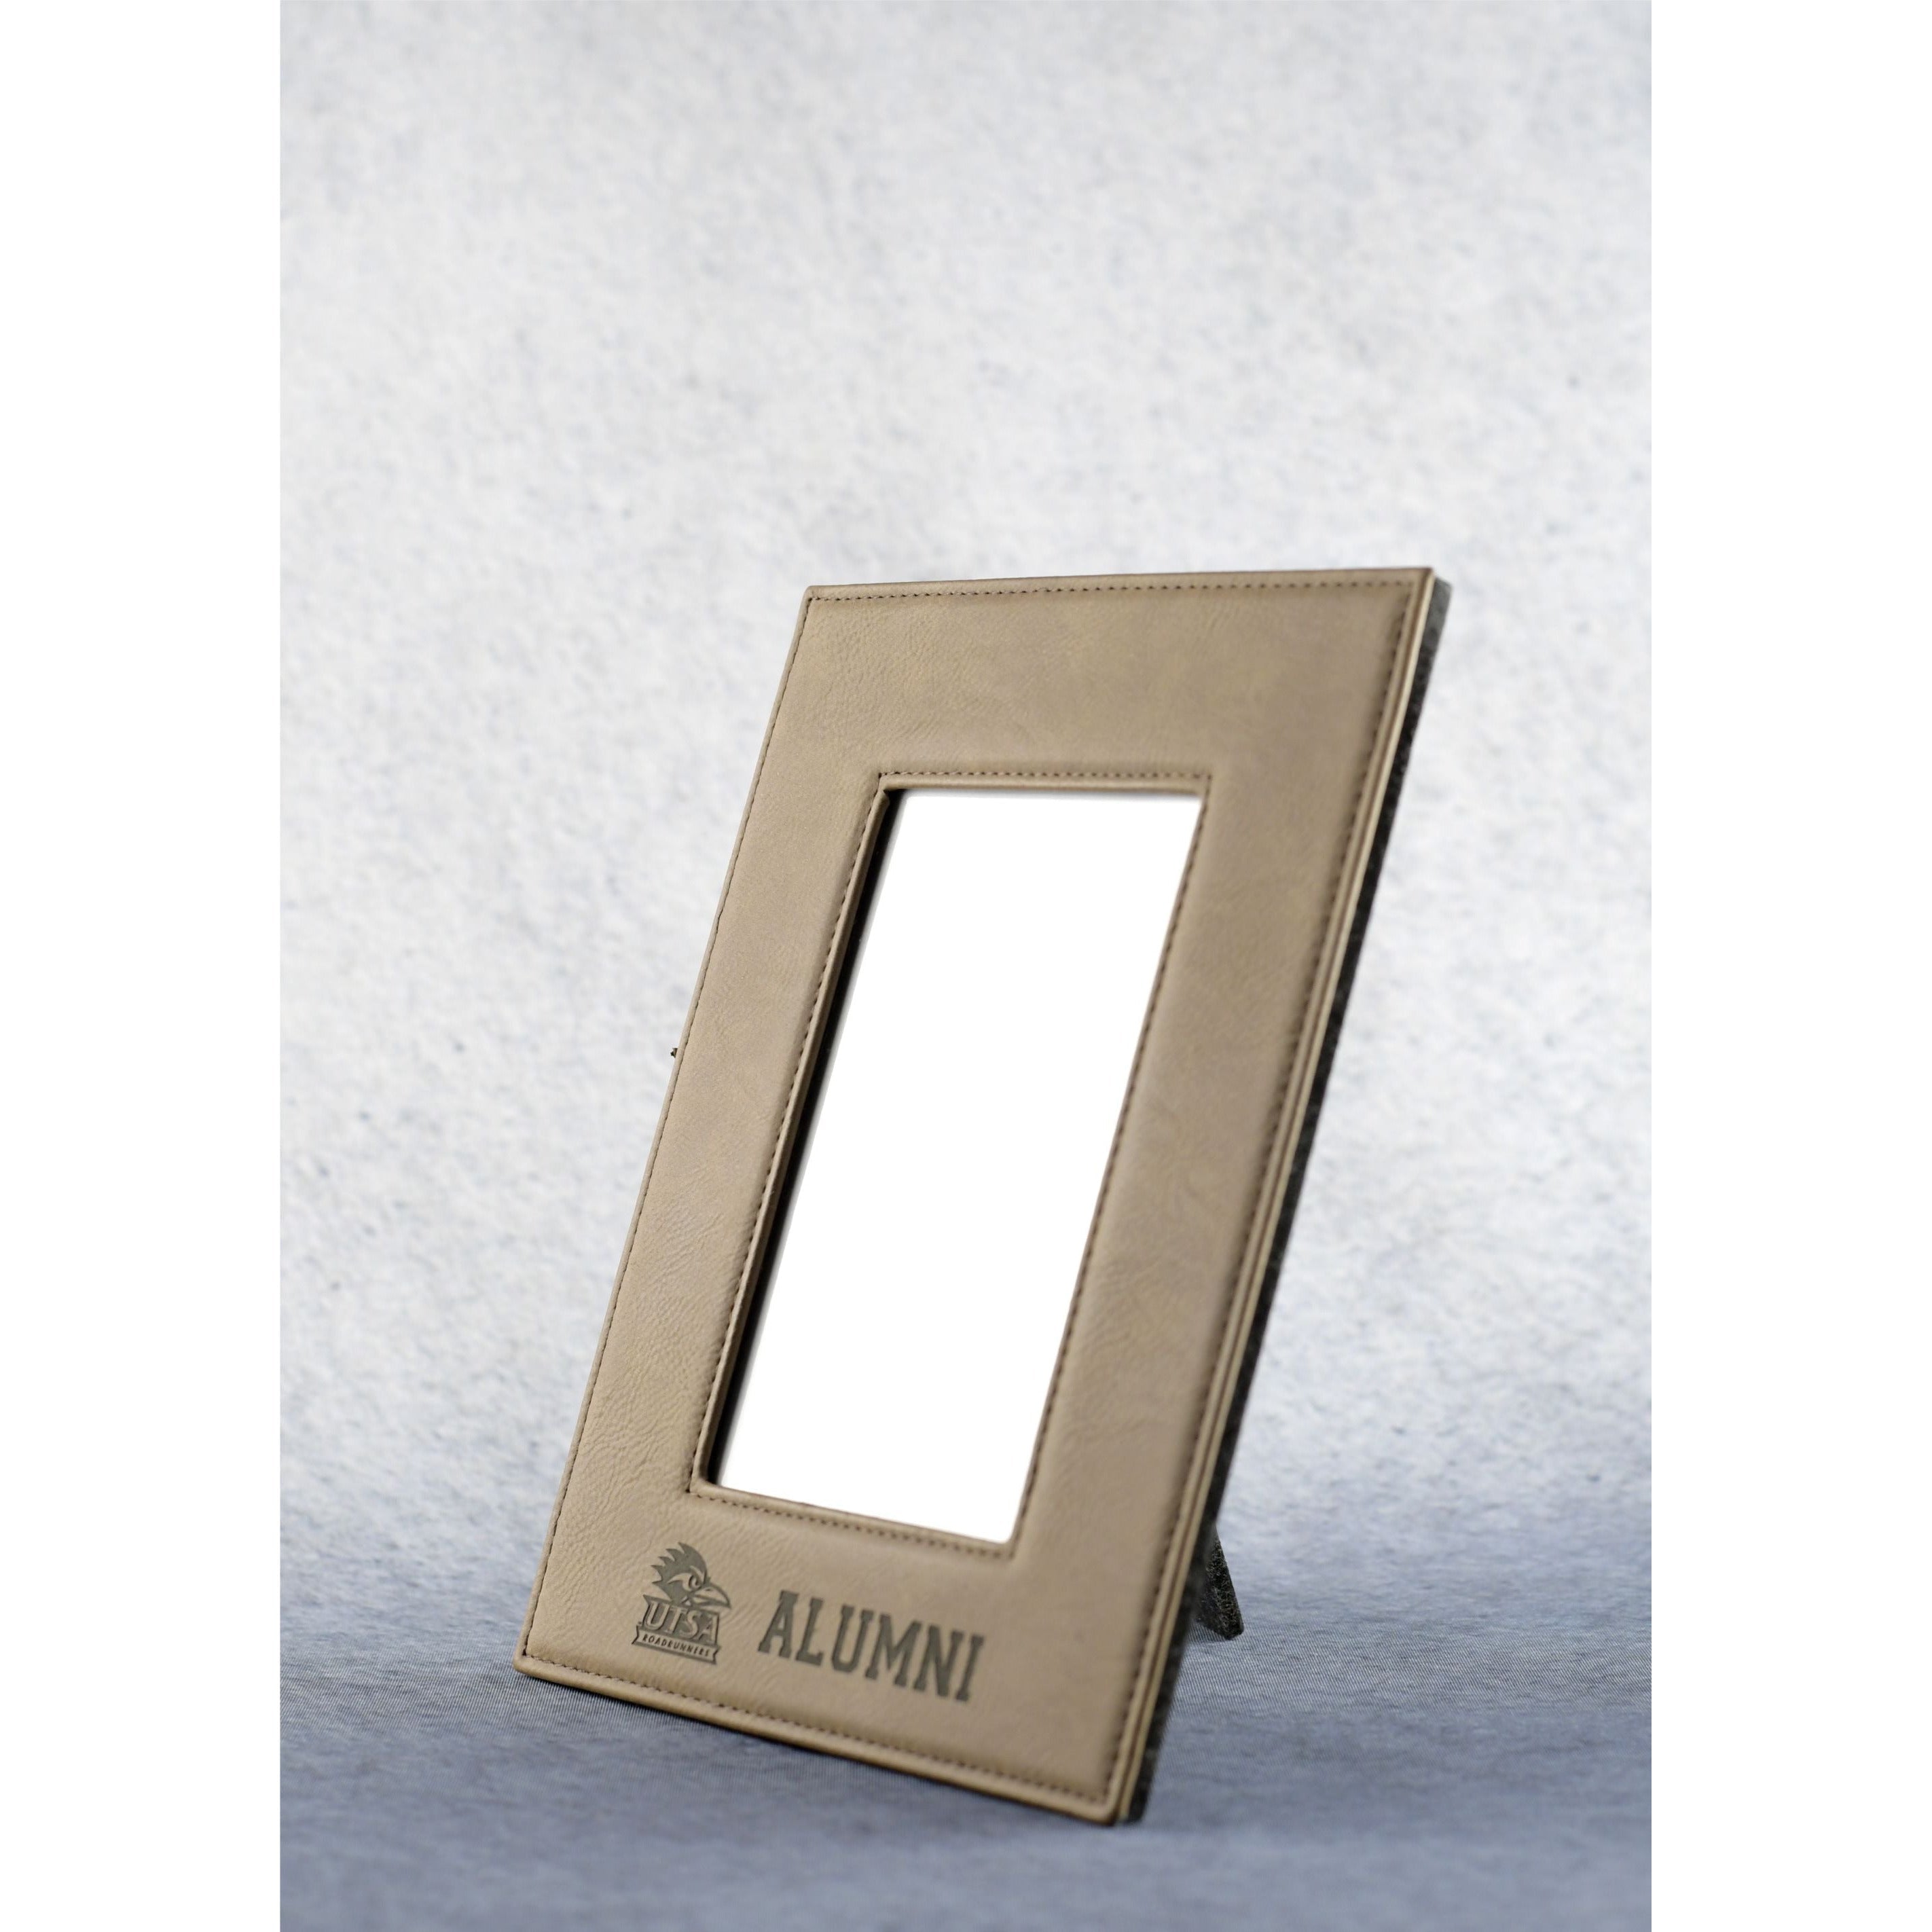 Leatherette Rawhide Picture Frame | Alliance Awards LLC.